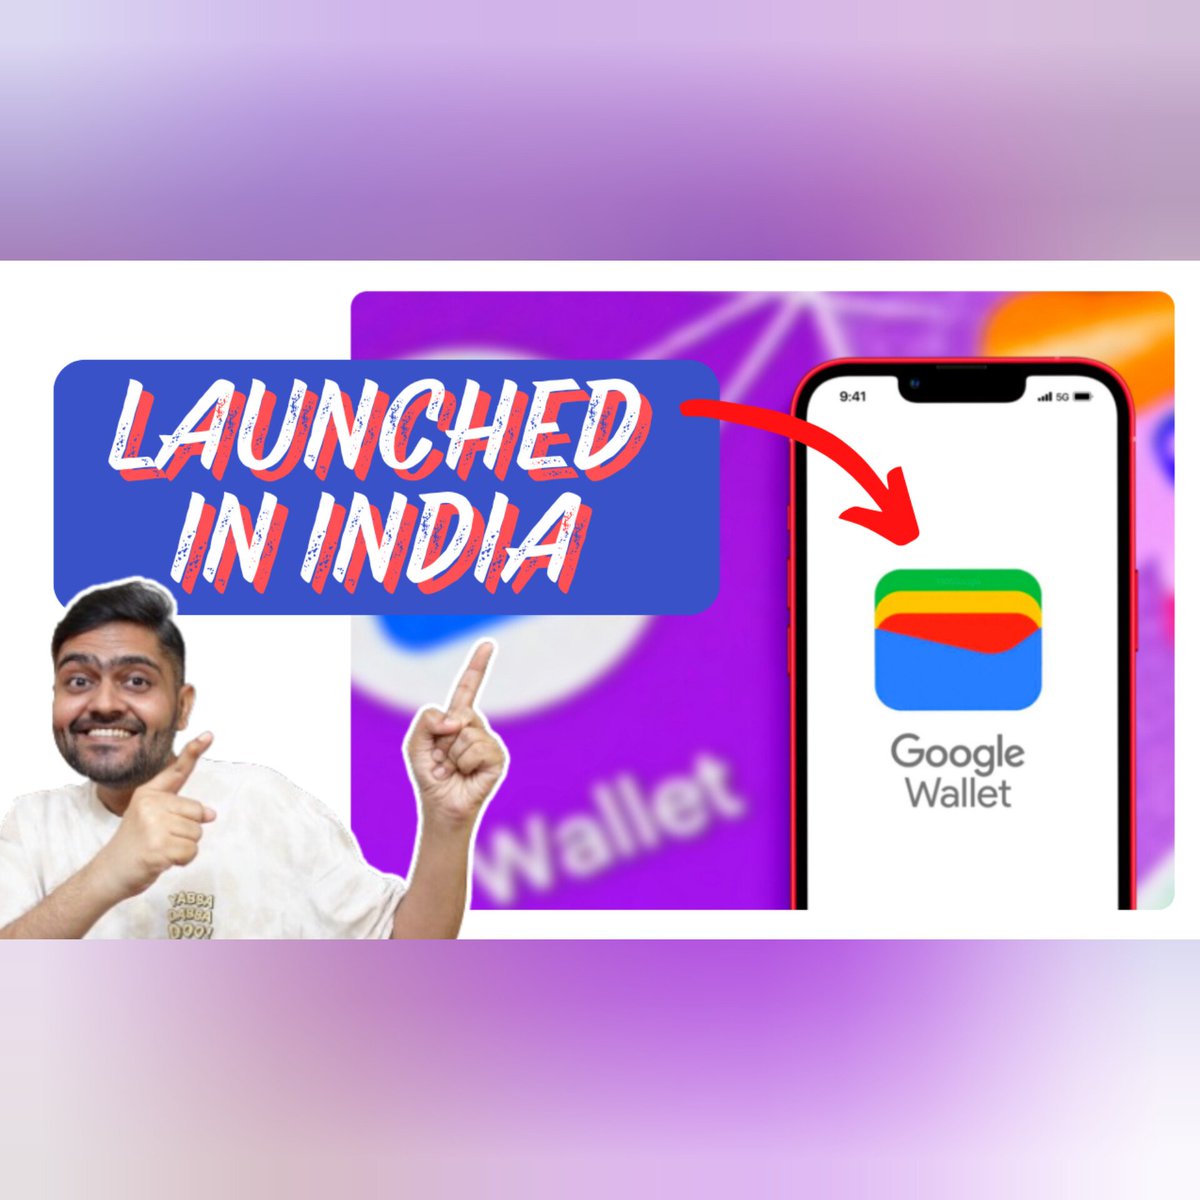 Why #googlewallet when we already have #googlepay or #gpay
& How it is different from #samsungpay & #applepay
Watch to know more - youtu.be/wWTeOfaFlUI

#inspiringprashant #inspiringprashanttech